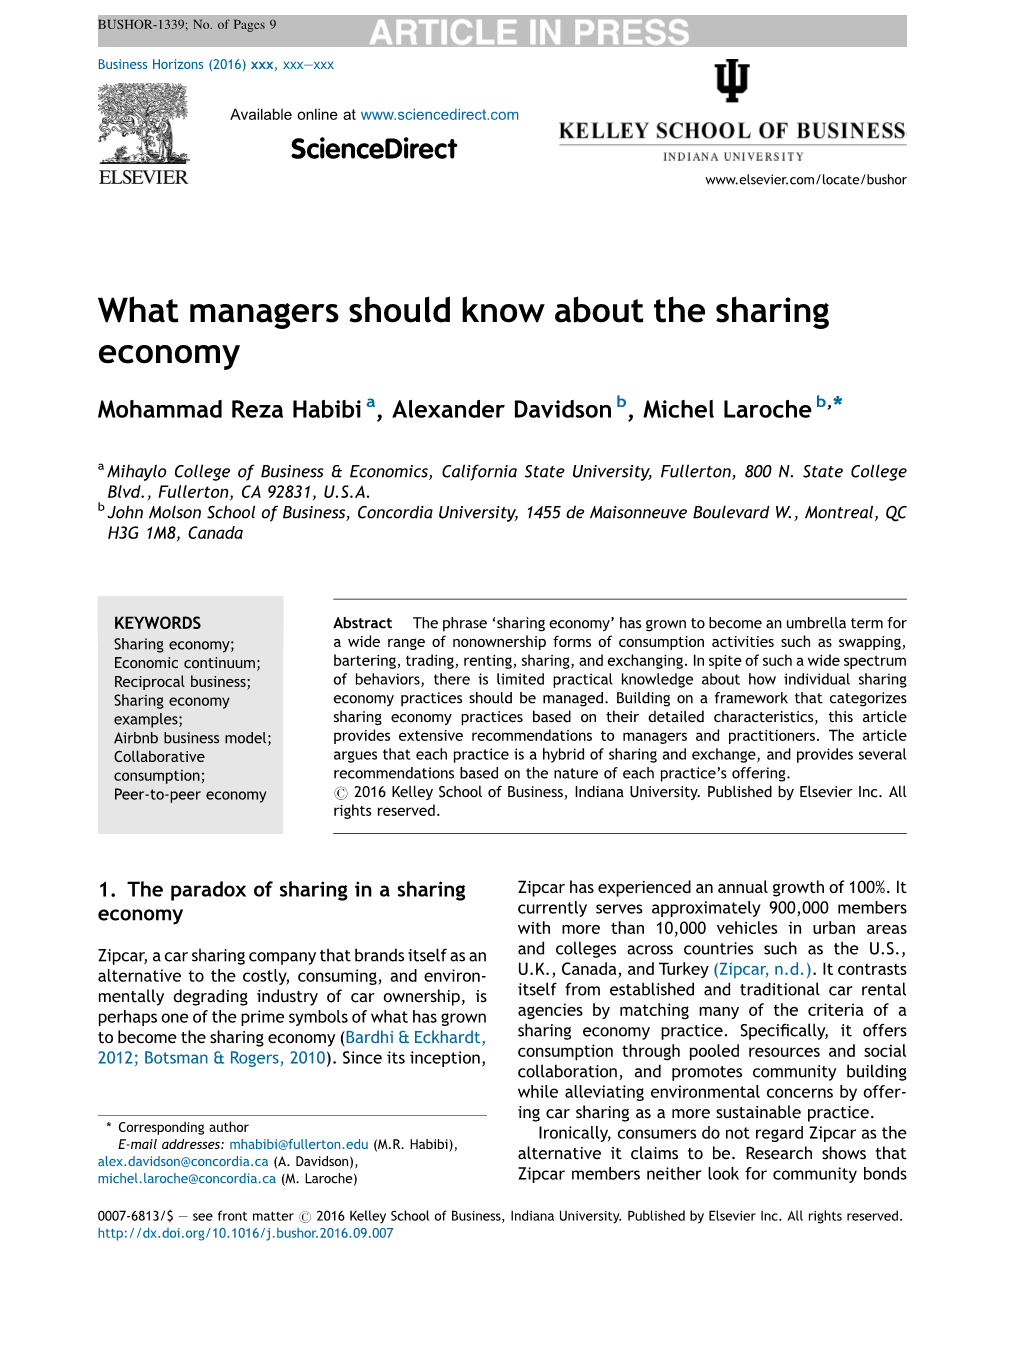 What Managers Should Know About the Sharing Economy